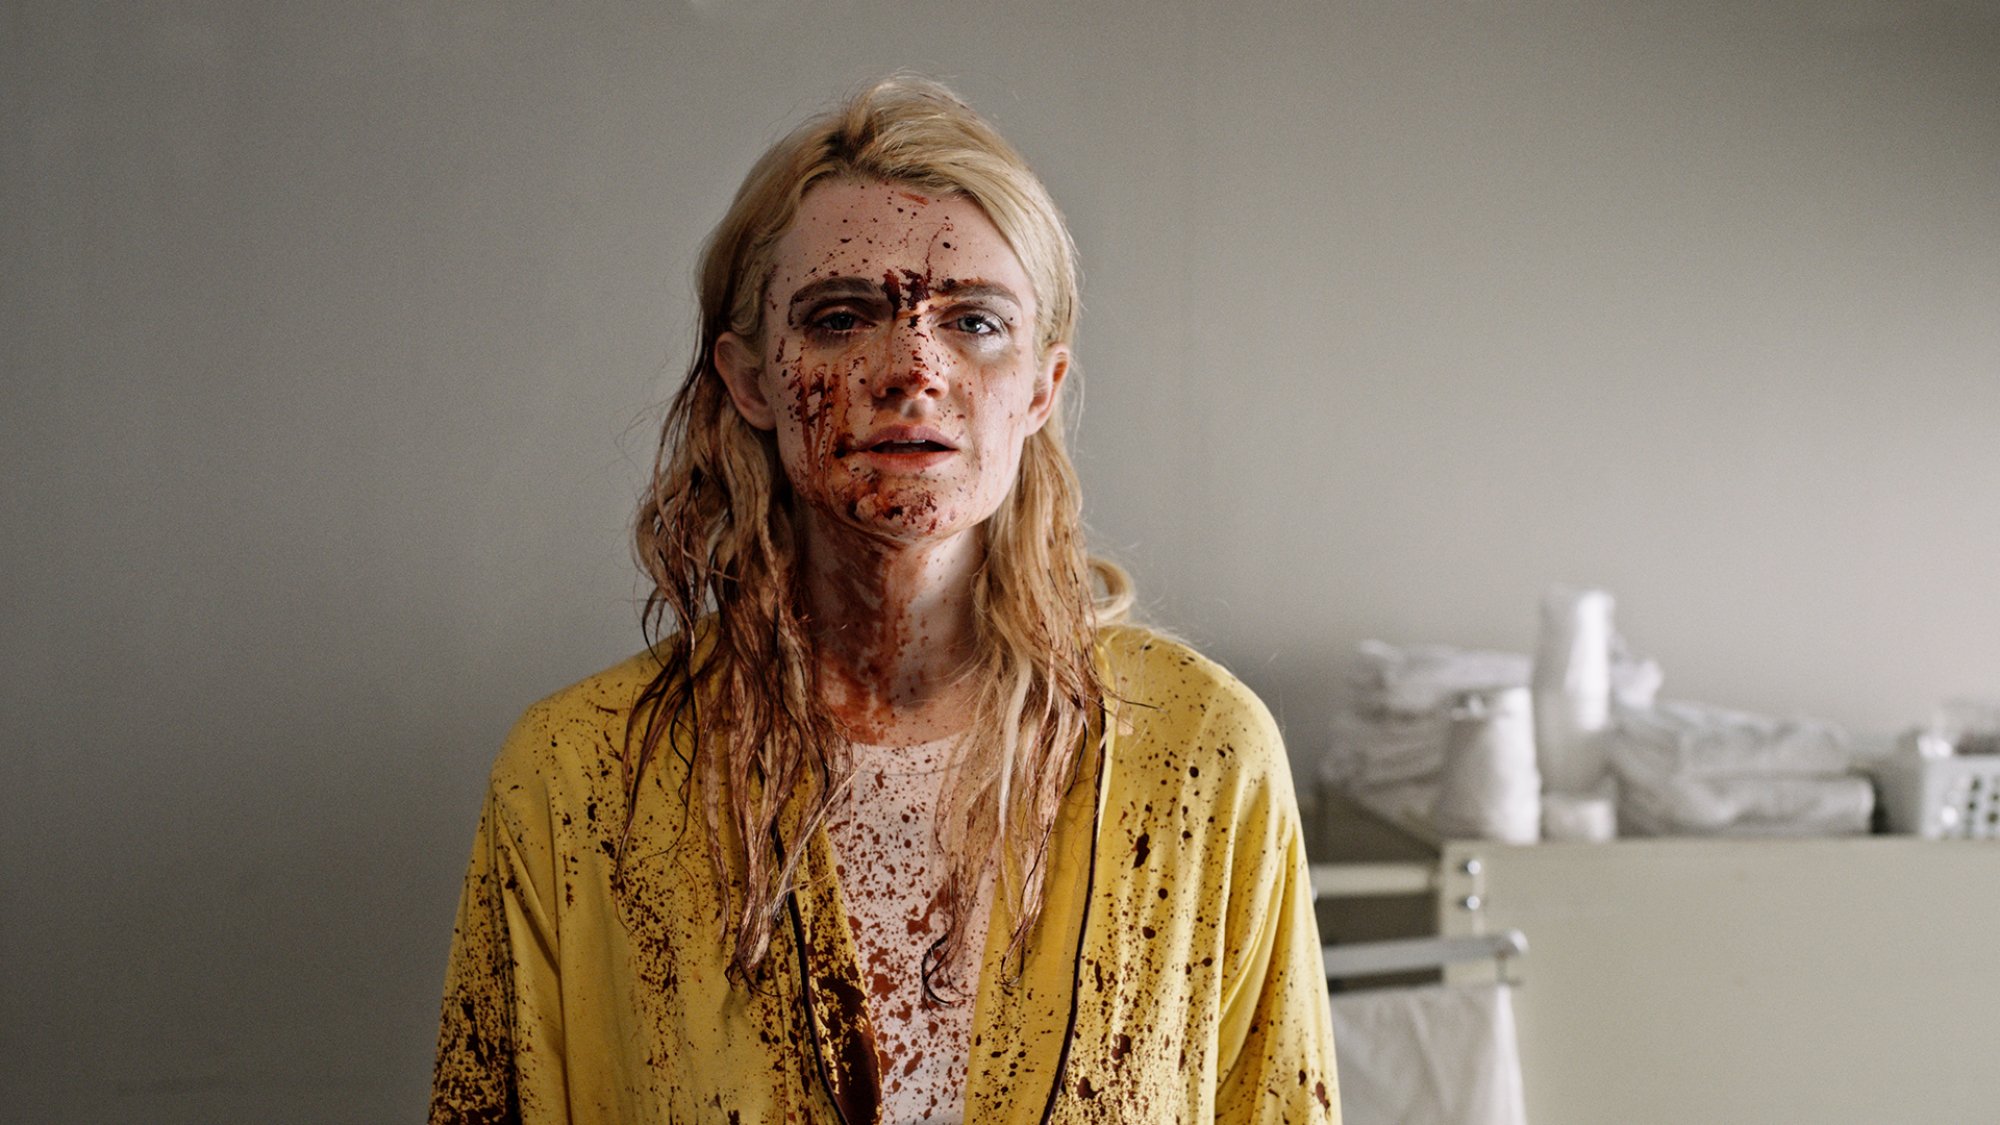 A woman stands in a room covered in blood spatters.